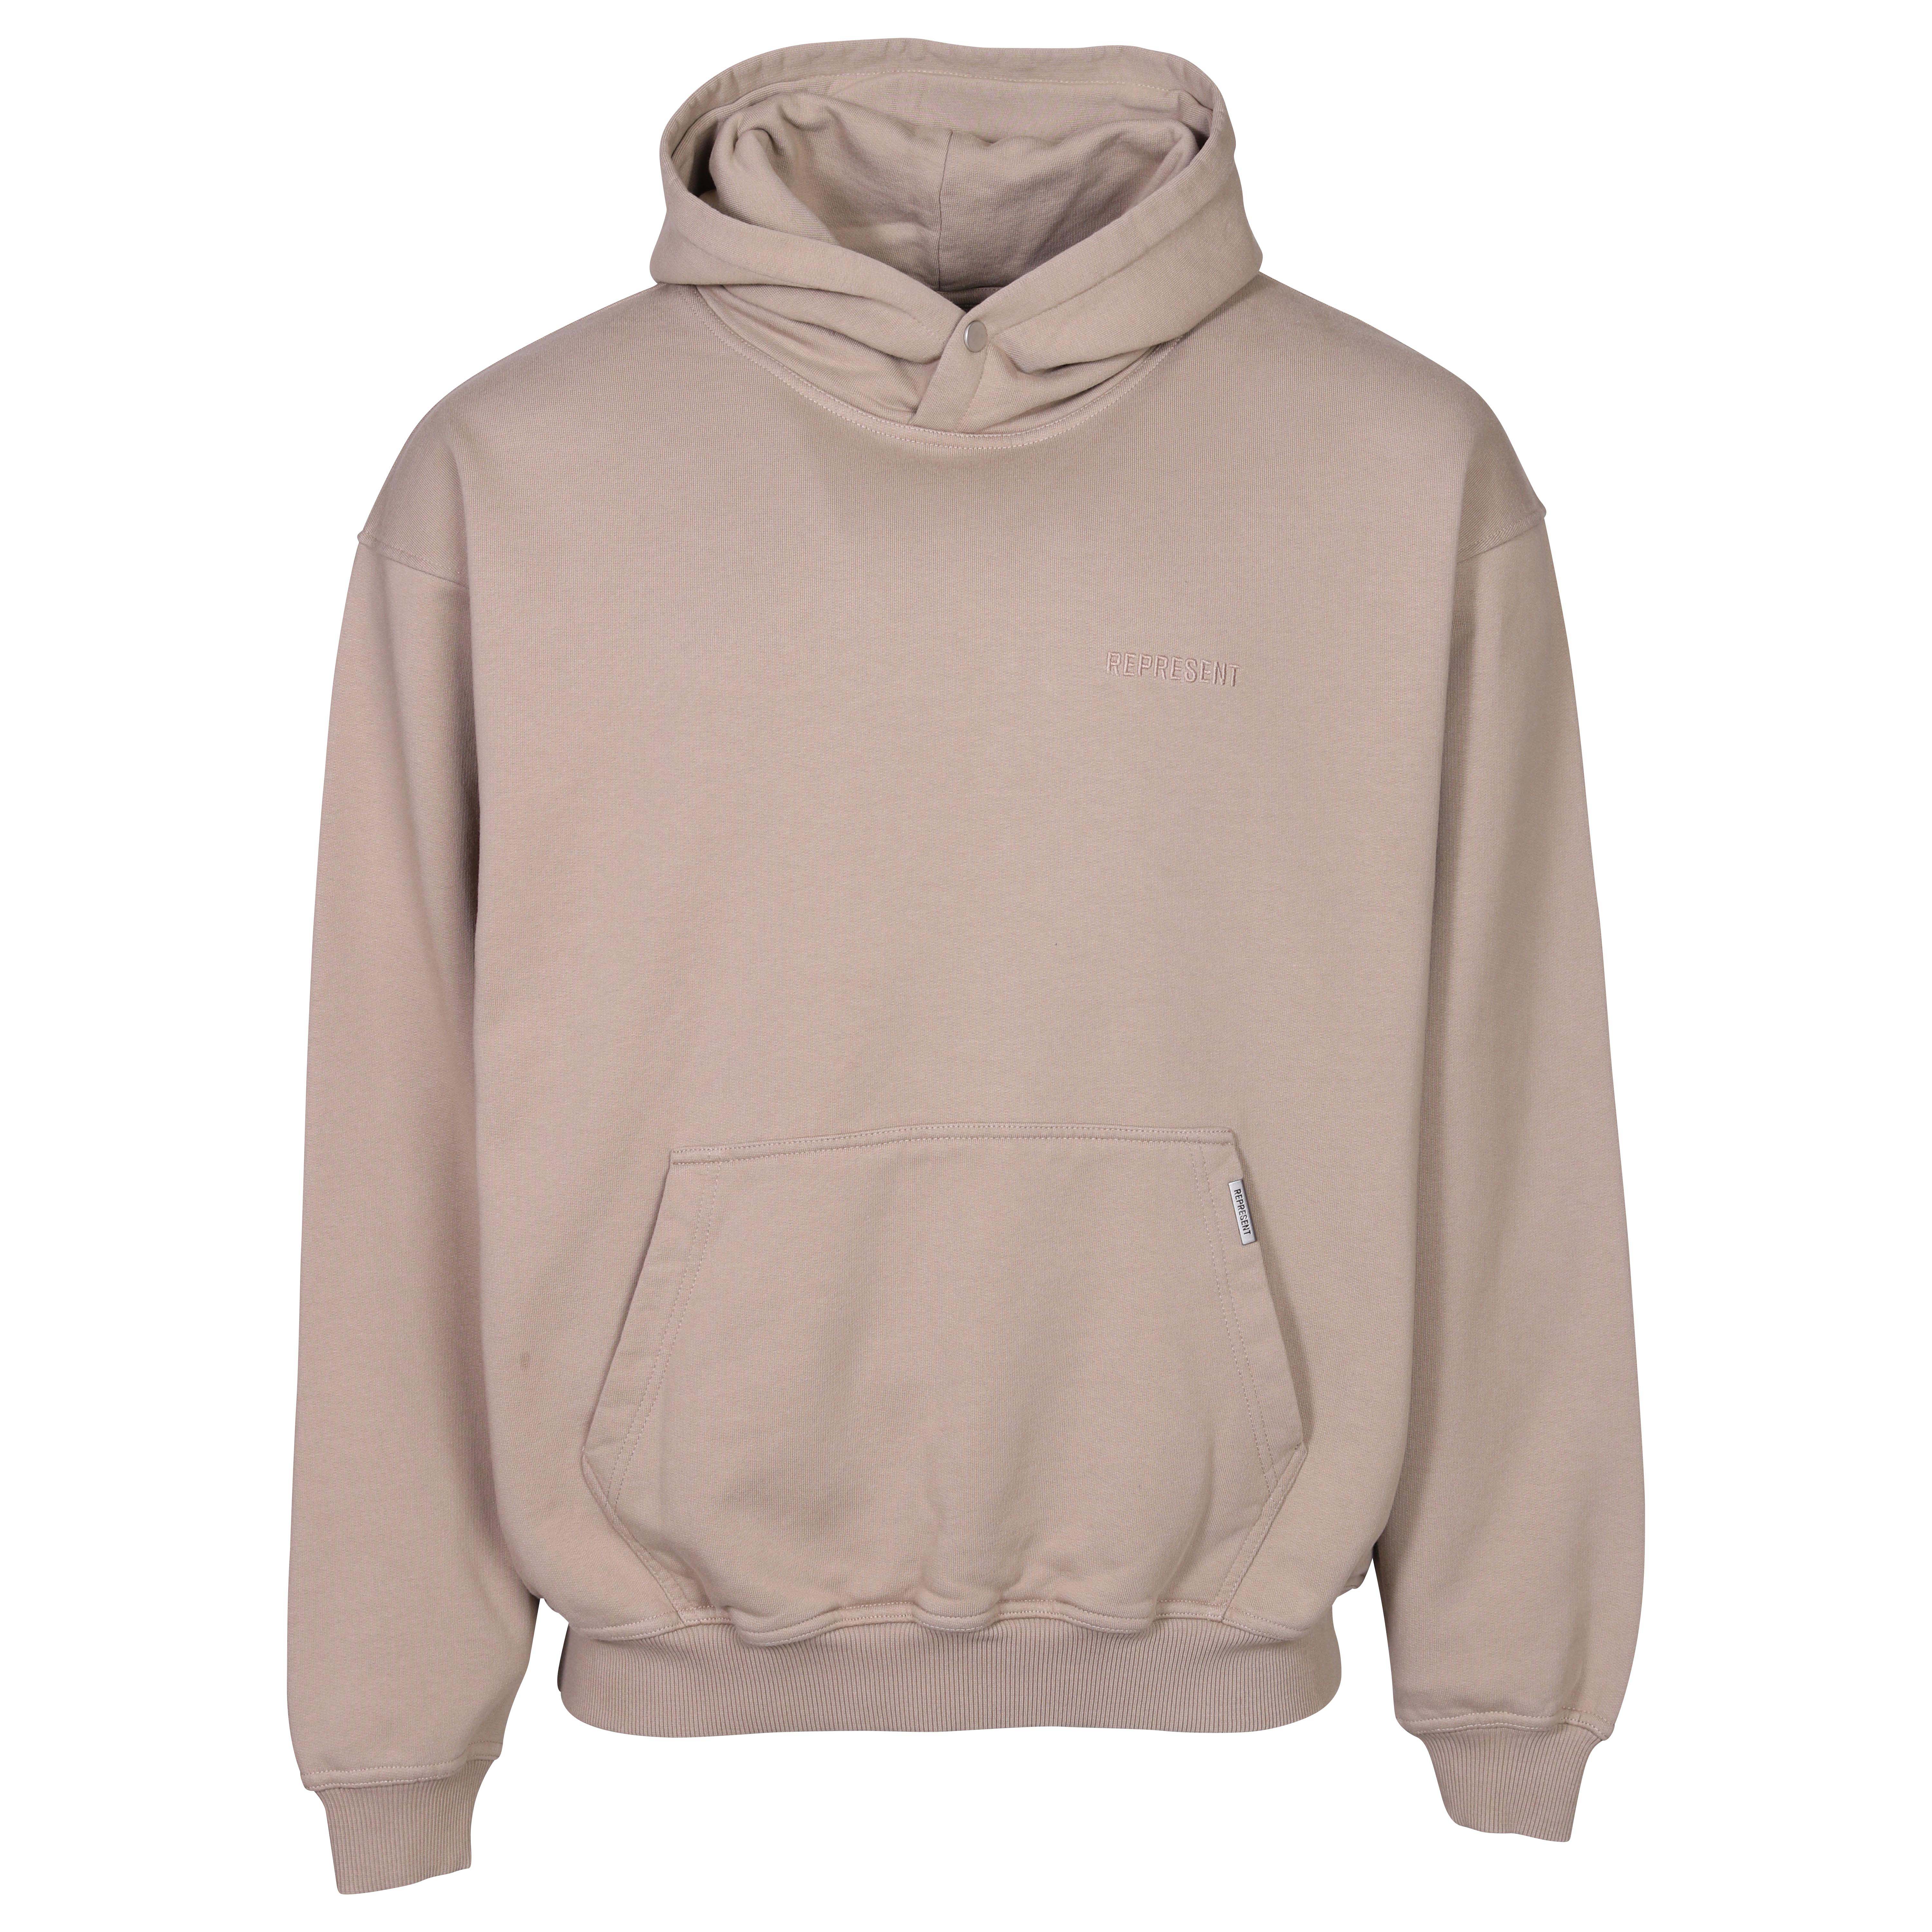 Represent Blank Hoodie in Taupe